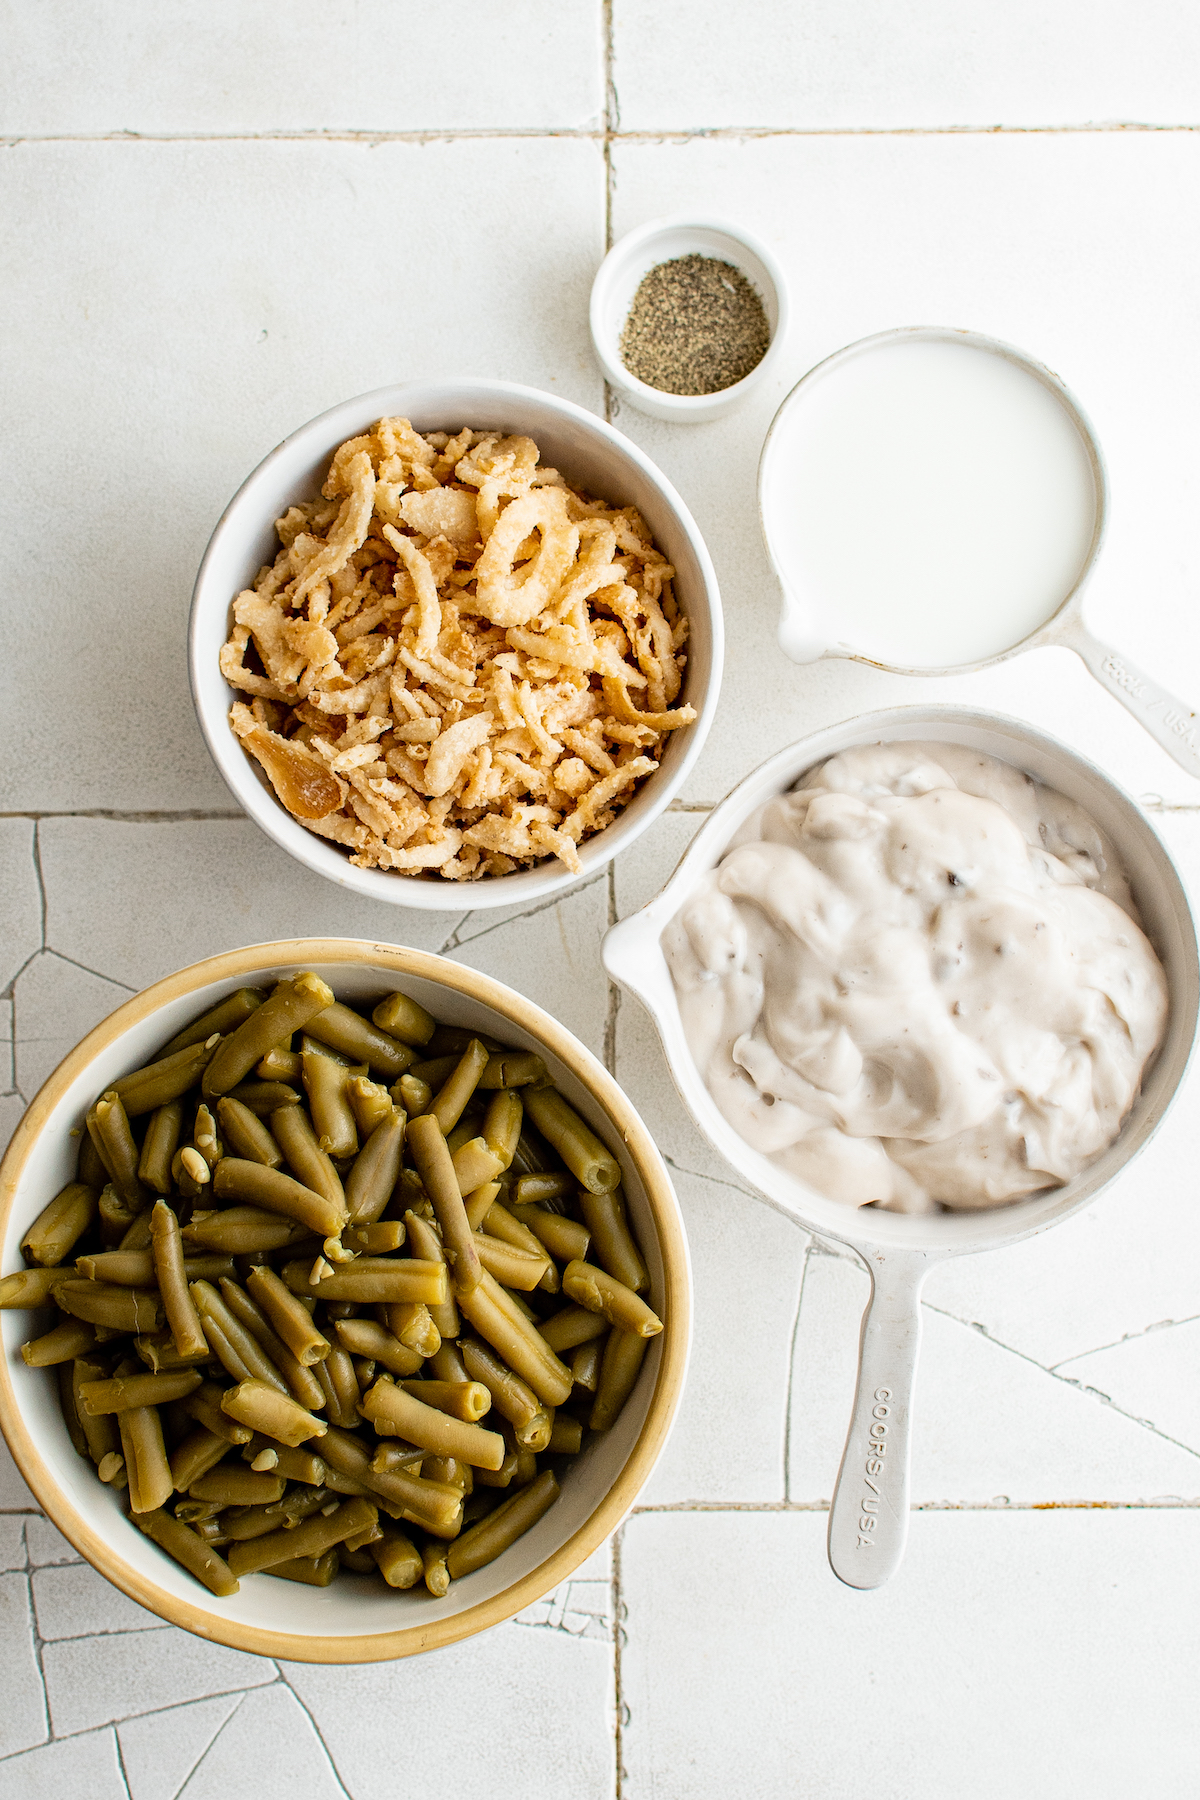 Ingredients for this easy green bean casserole recipe from the top: Black pepper, milk, mushroom soup, green beans, and french fried onions.